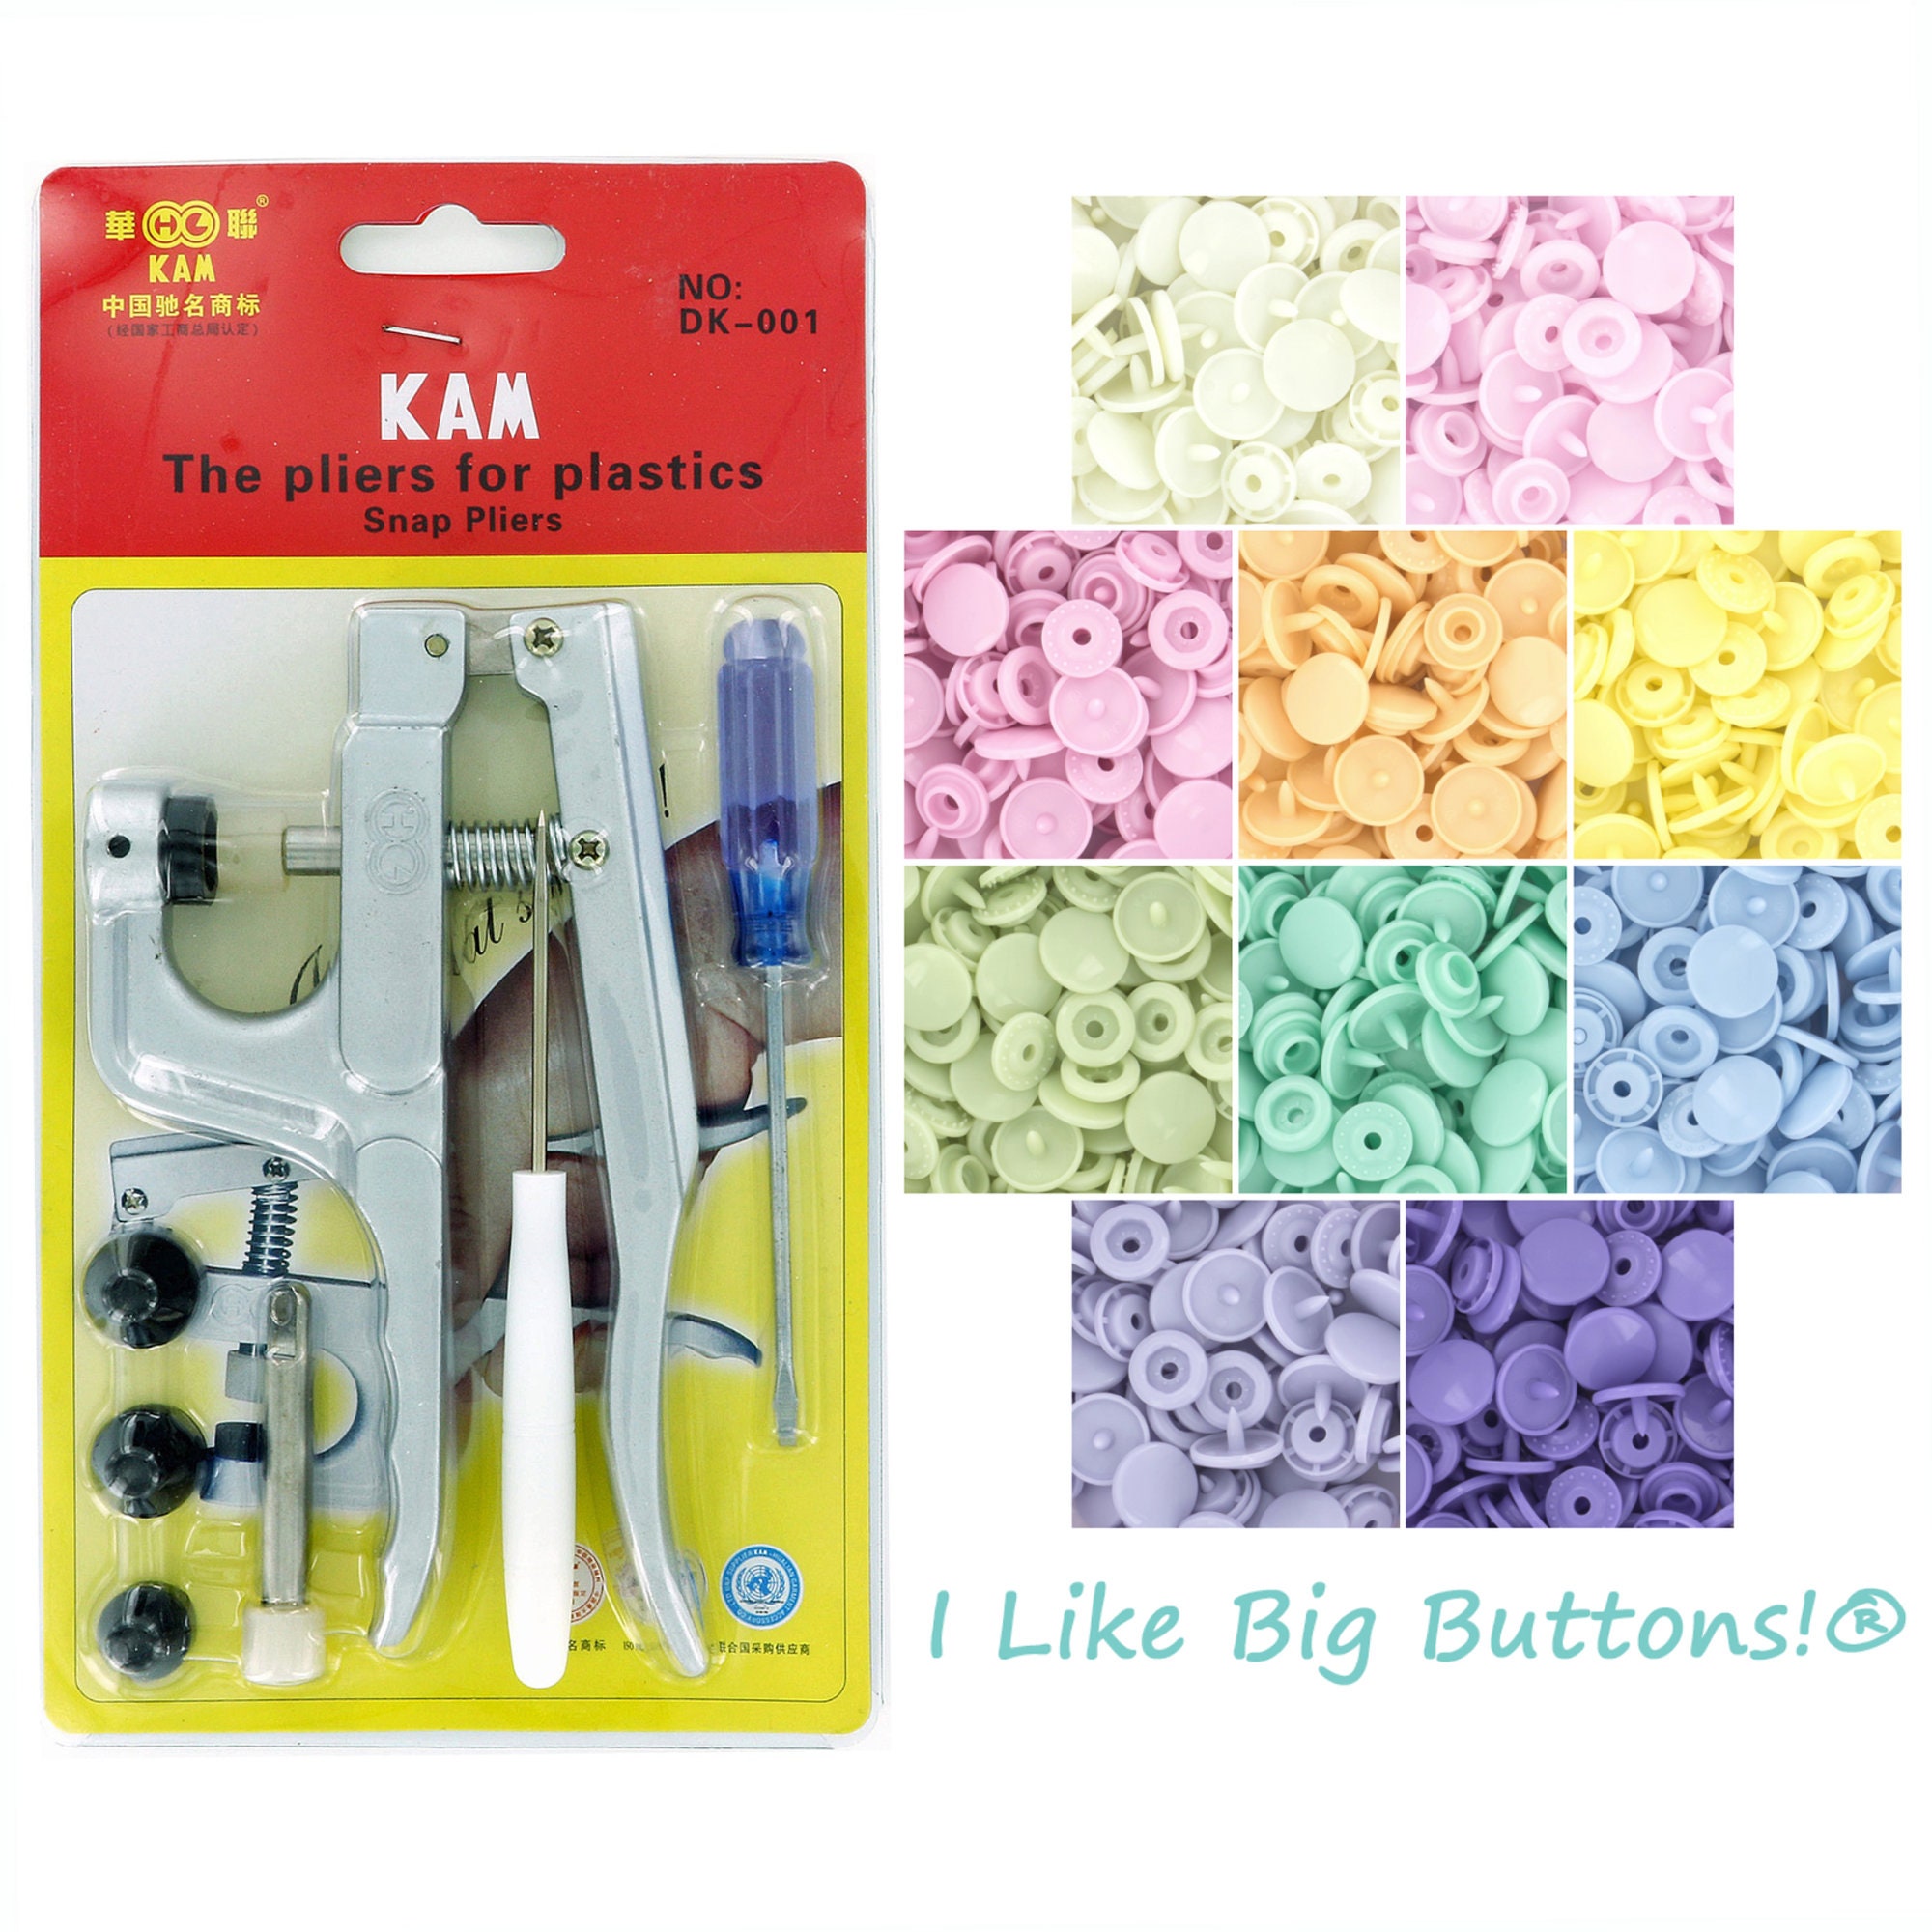 300 KAM Snaps Starter Kit With KAM Plier & Dies, KAM Snap Kit With Storage,  Plastic Kam Snap Press, Baby Clothes Snaps Organizer Box 